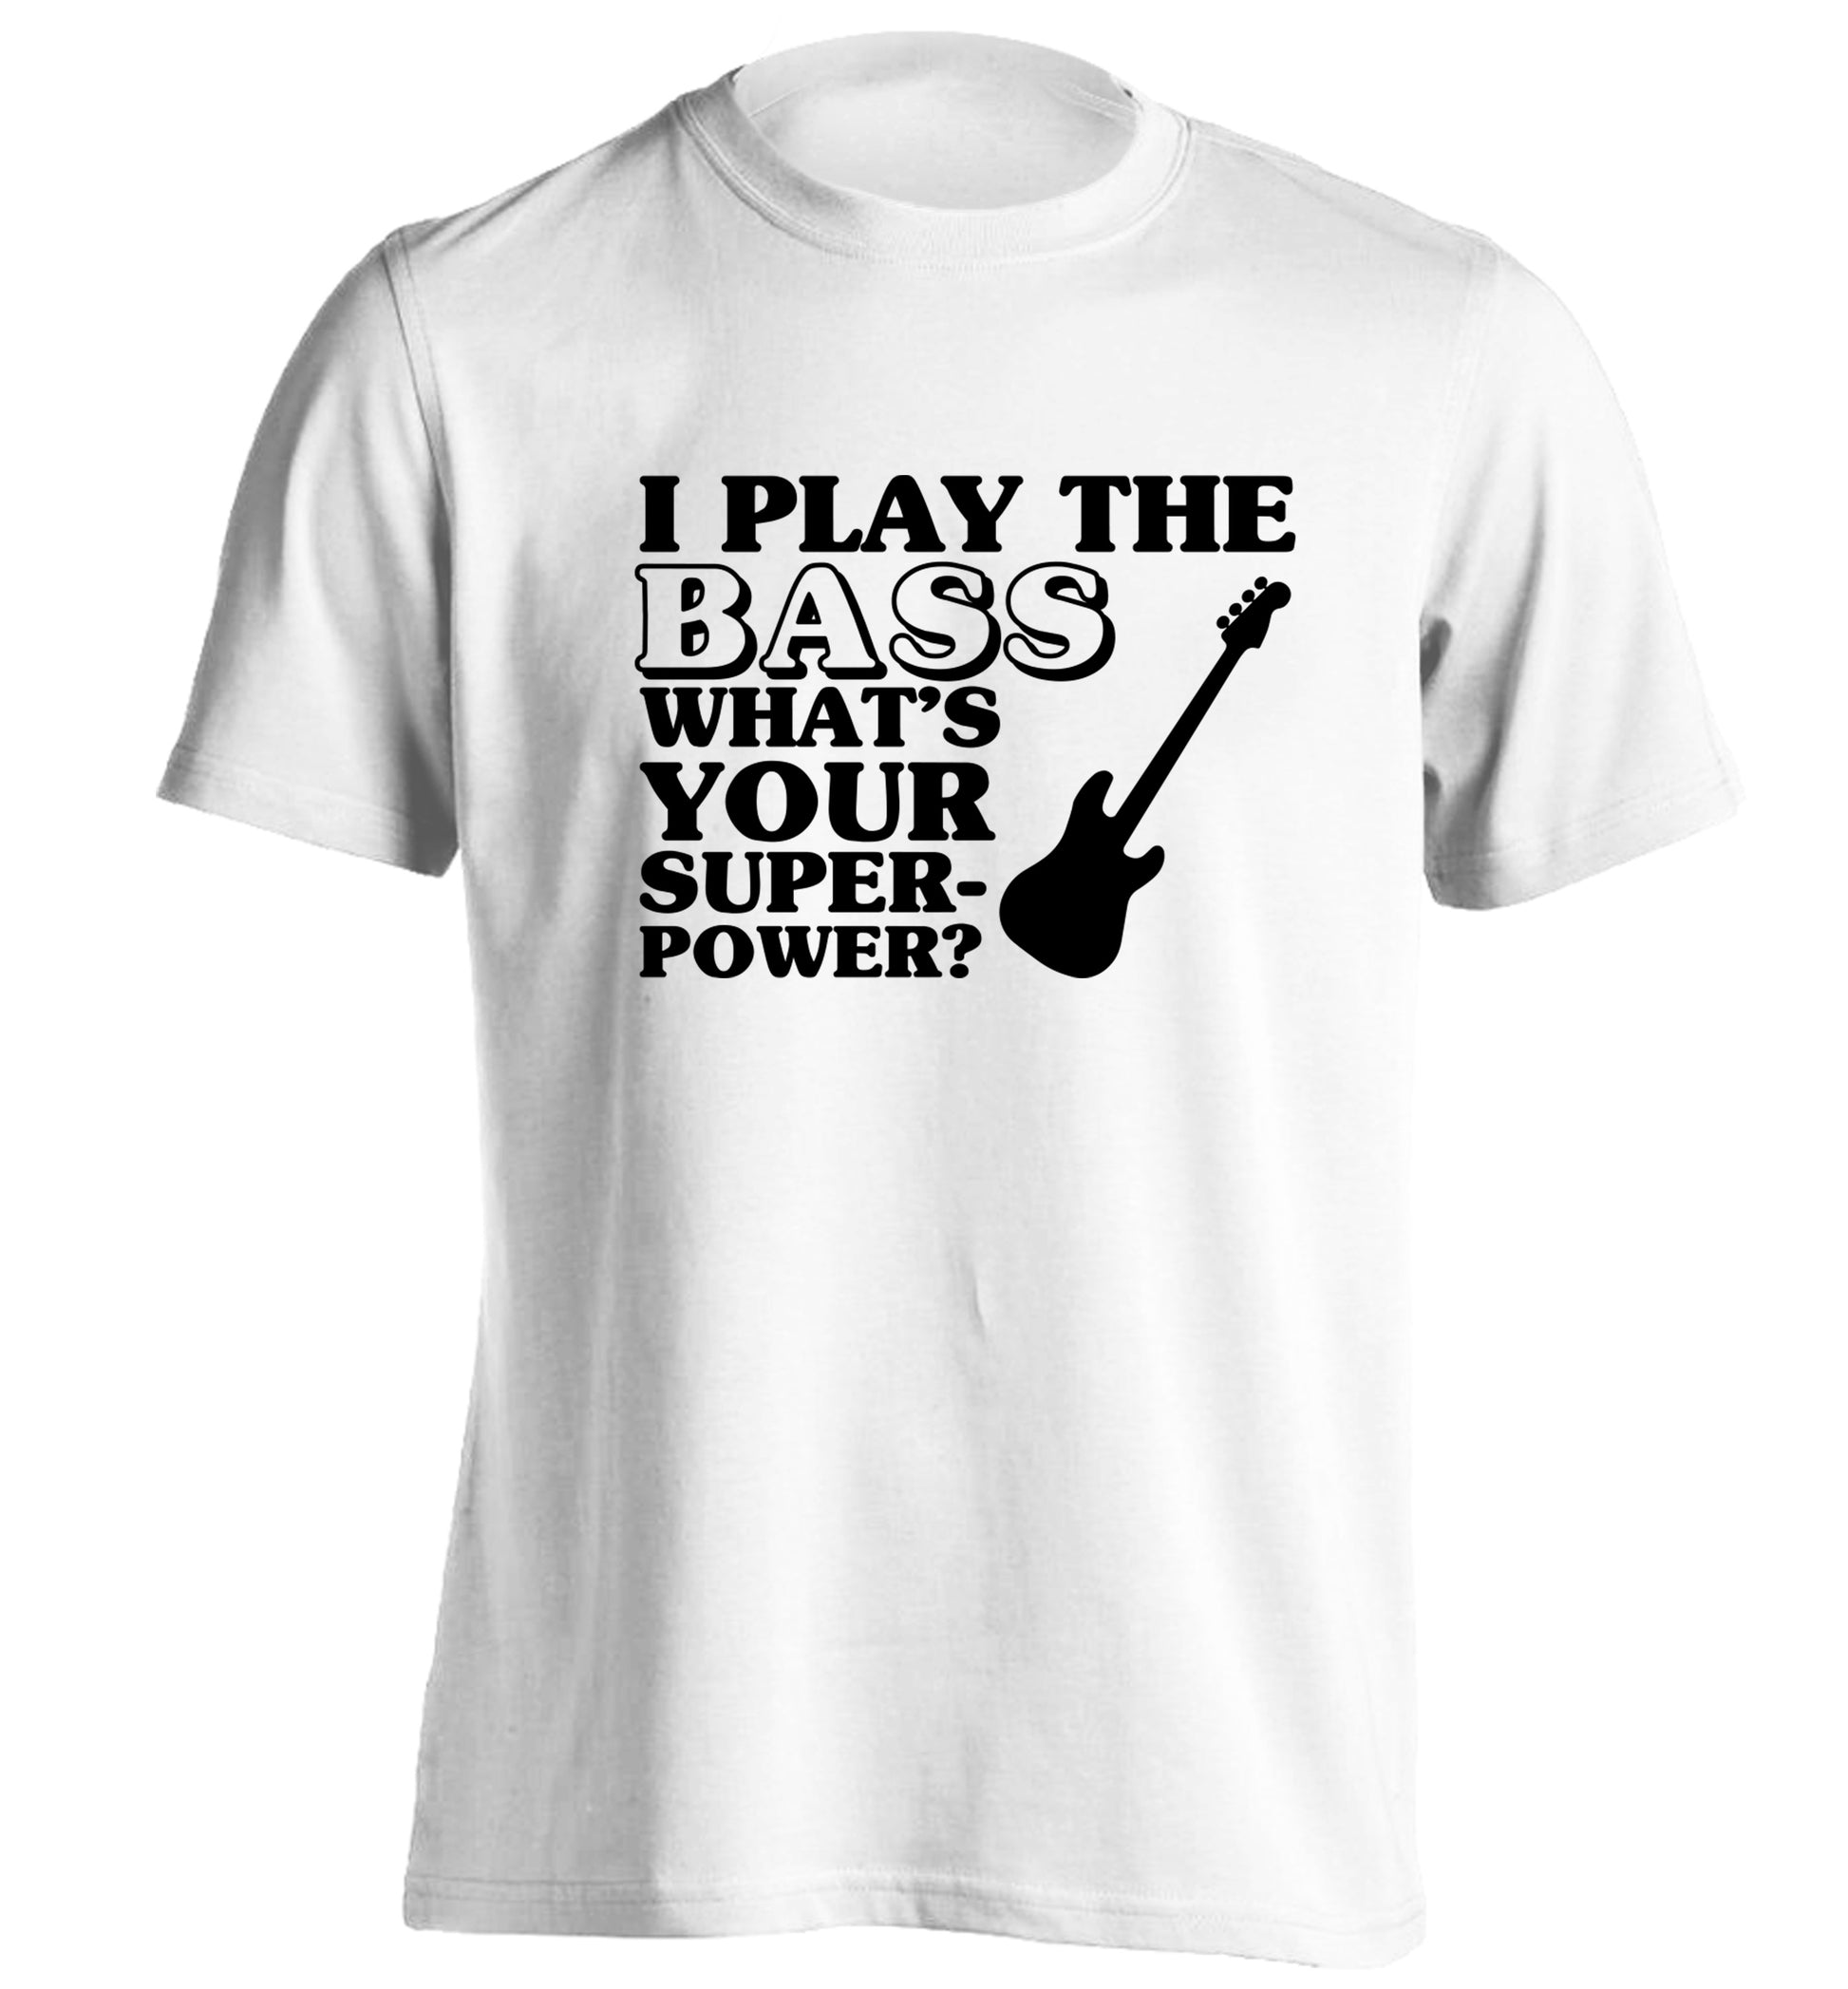 I play the bass what's your superpower? adults unisex white Tshirt 2XL